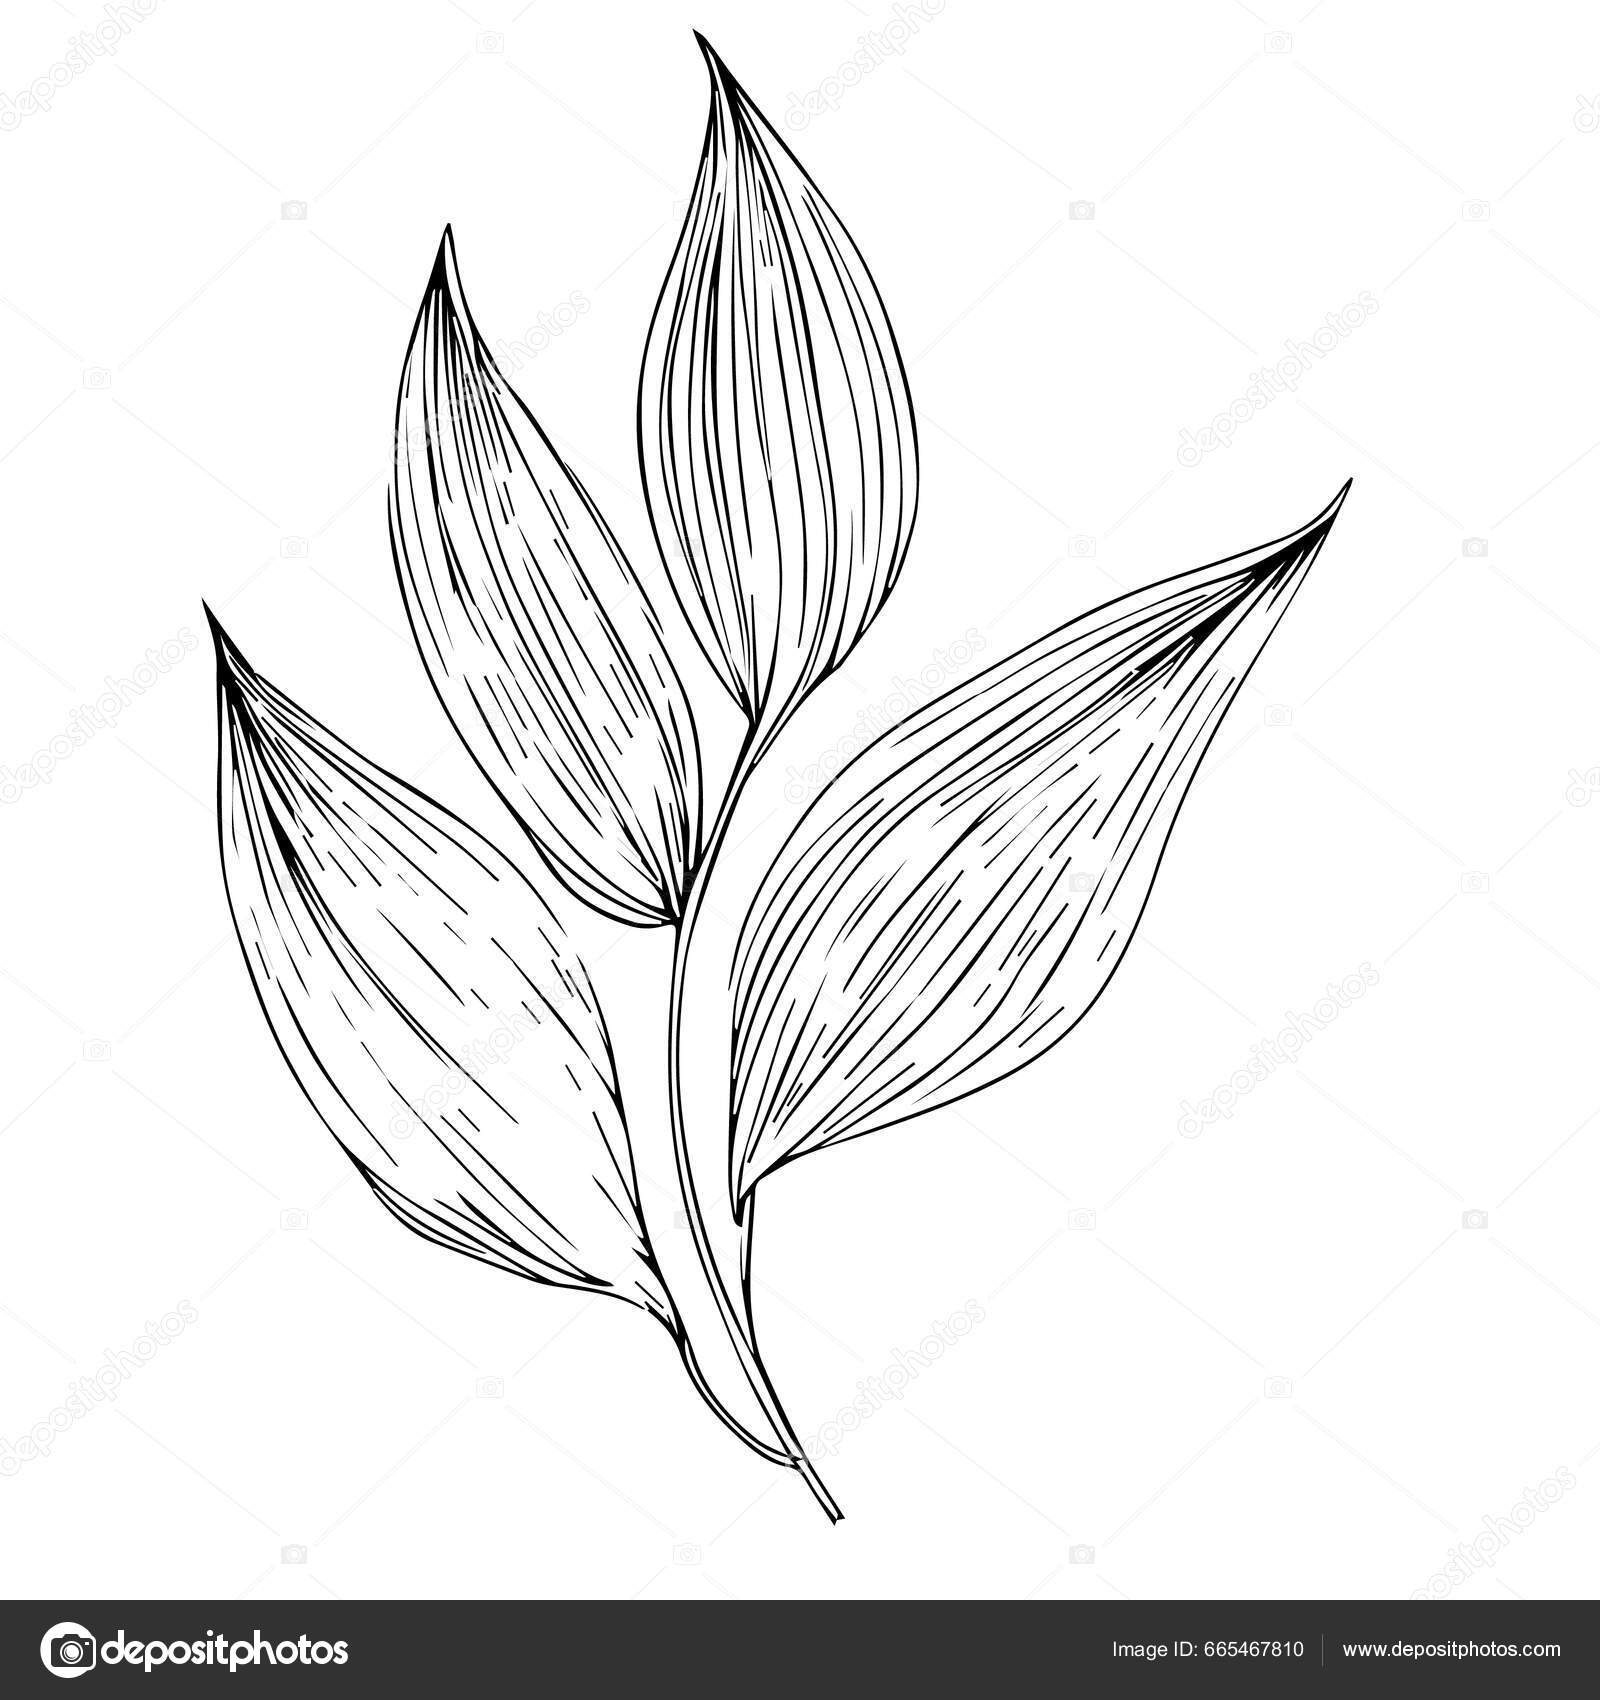 How To Draw A Pot Leaf, Step by Step, Drawing Guide, by Dawn - DragoArt